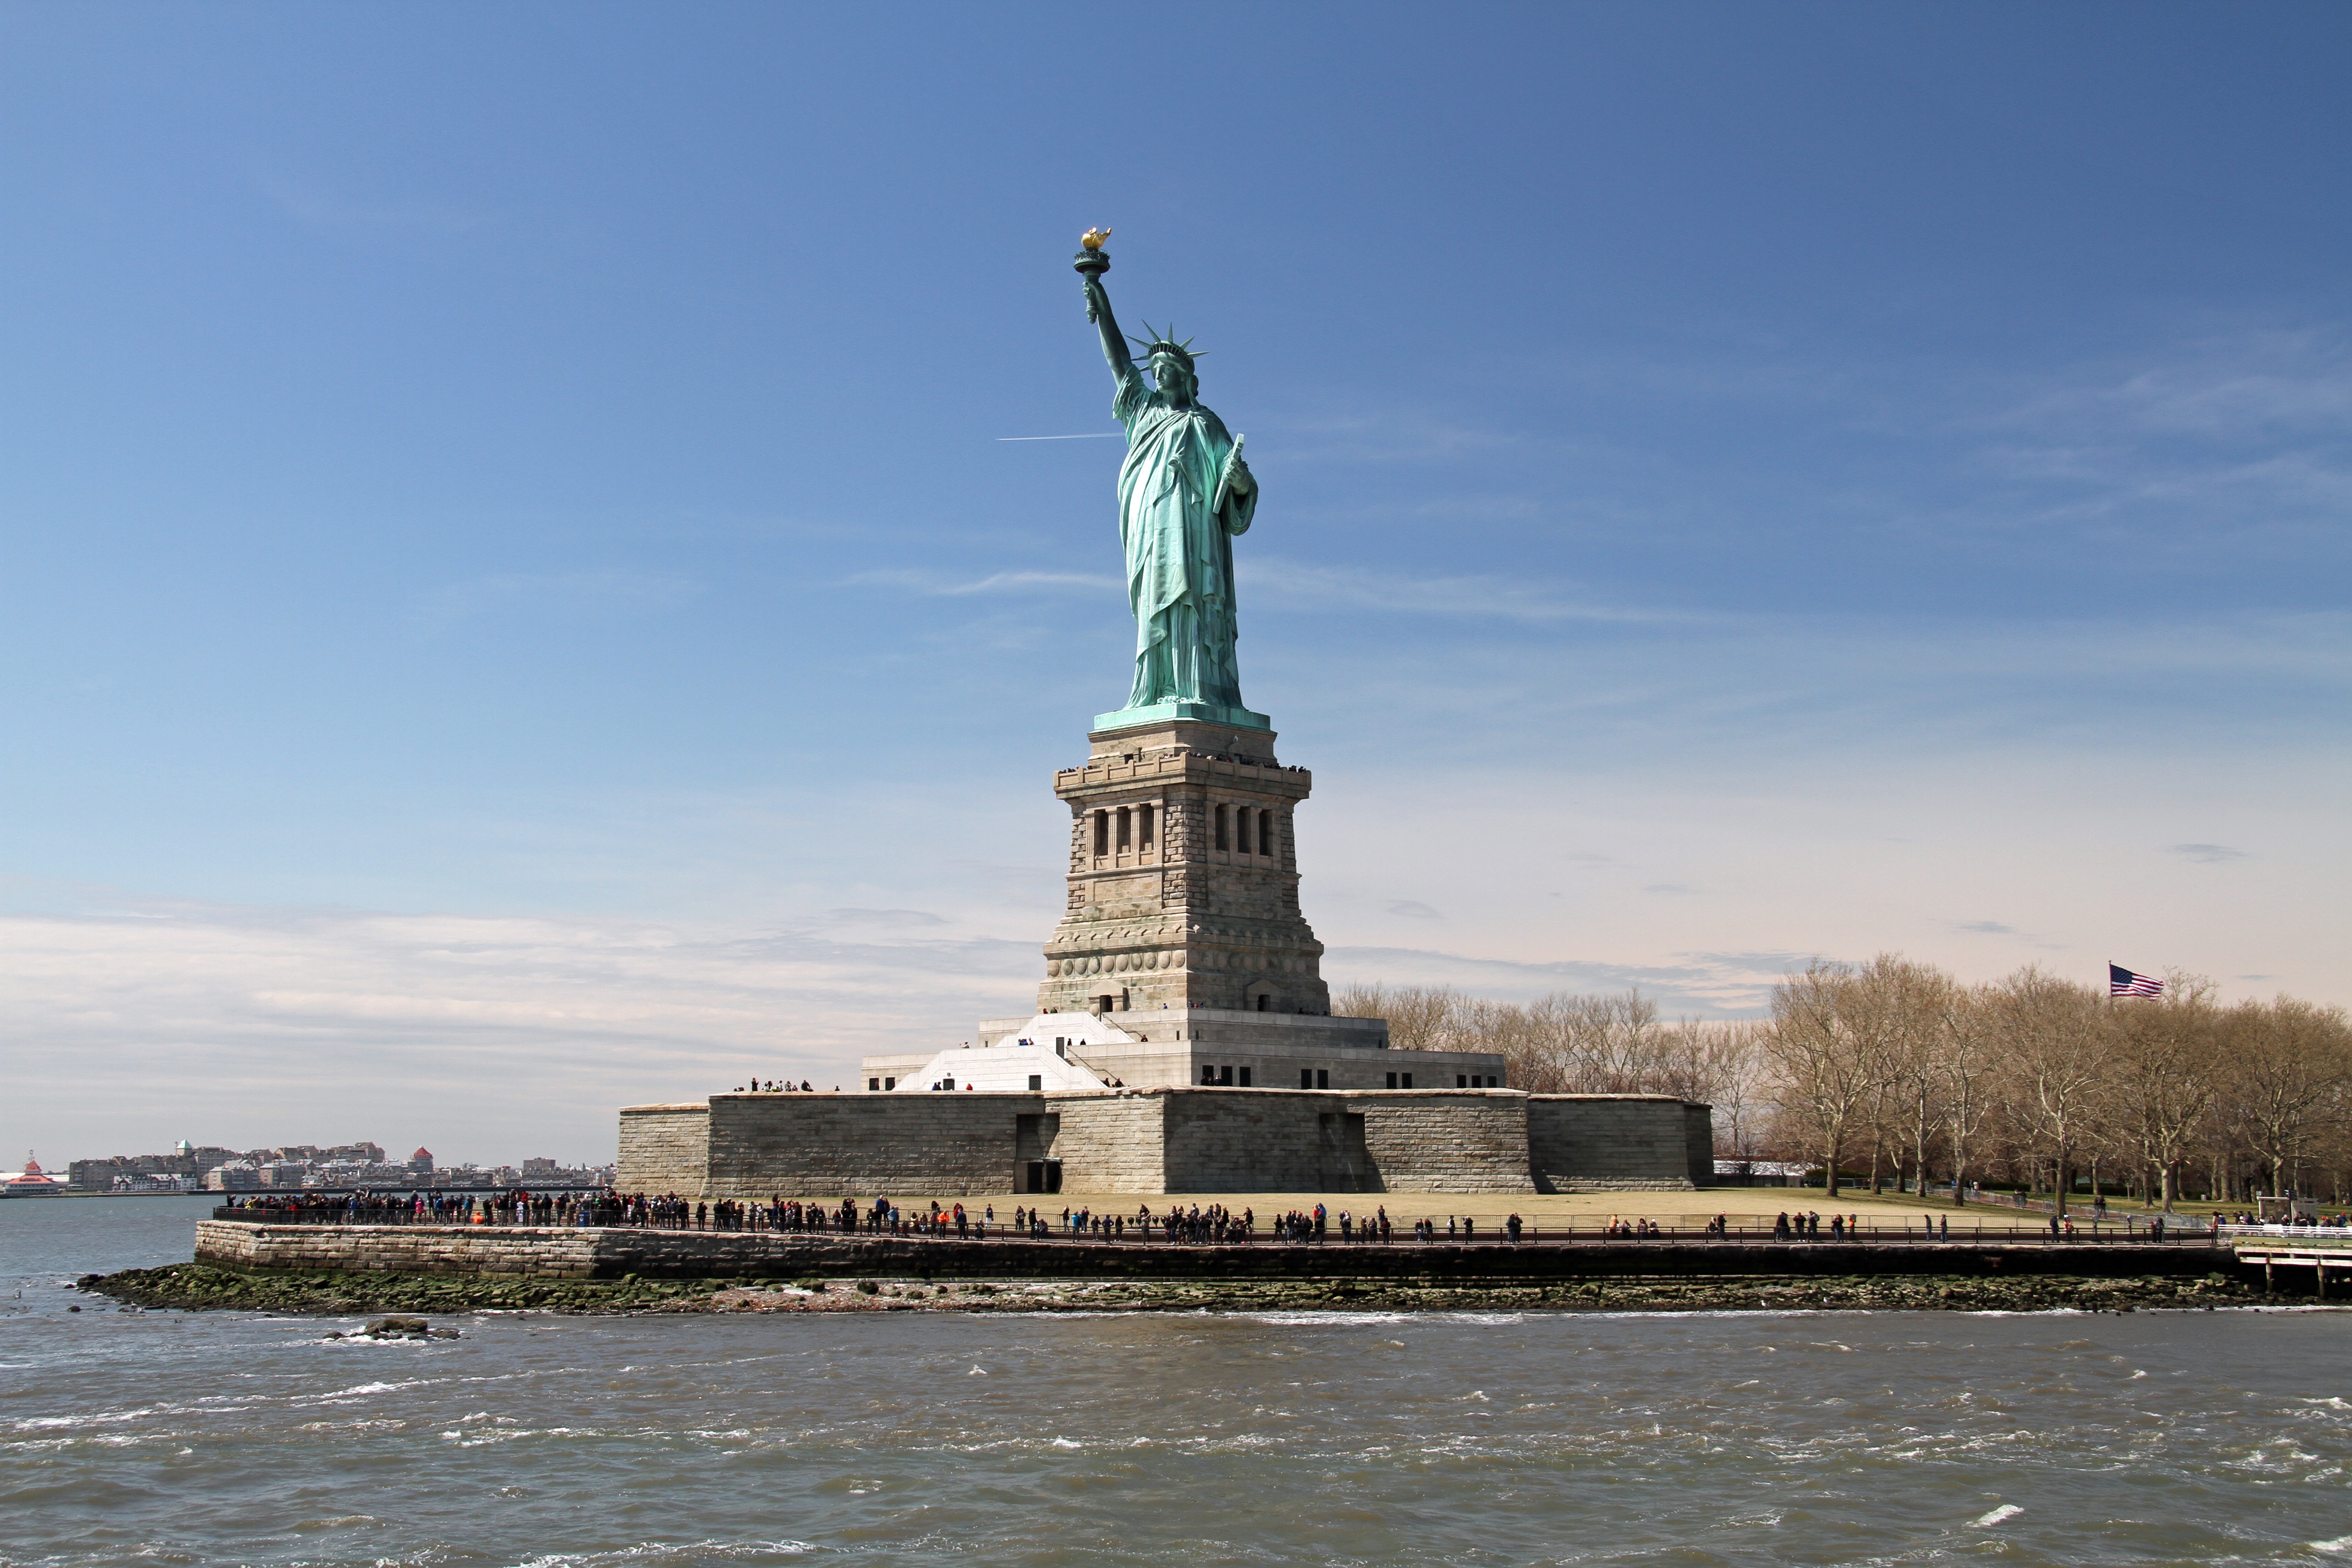 Statue of Liberty is a colossal neoclassical sculpture on Liberty Island in New York Harbor by MonicaVolpin